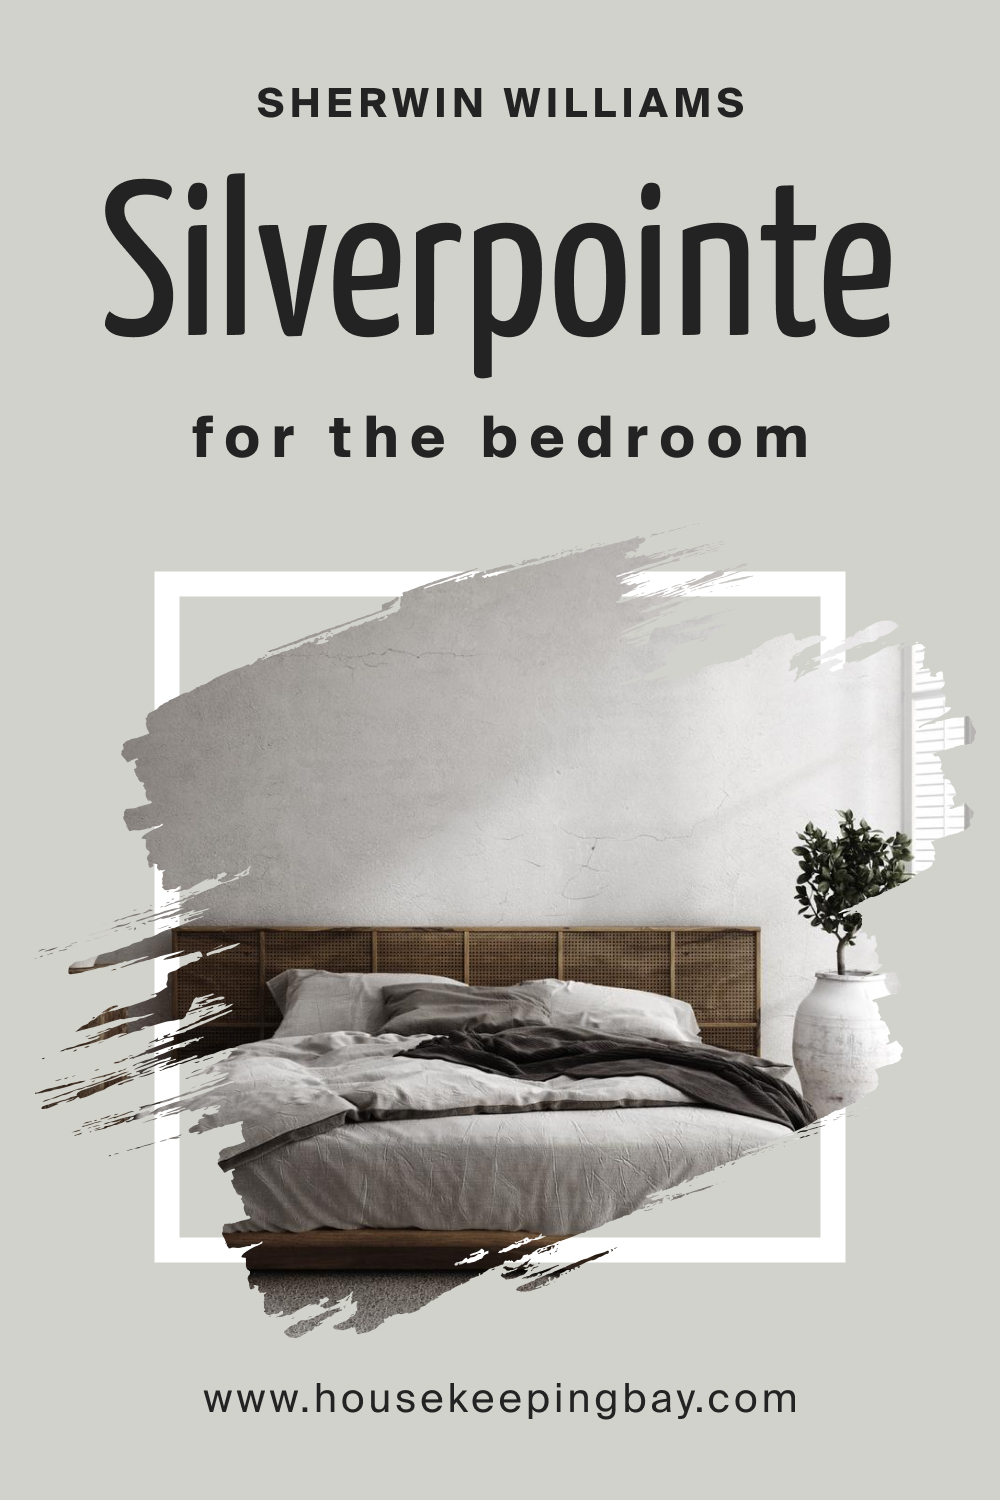 Sherwin Williams. SW Silverpointe For the bedroom